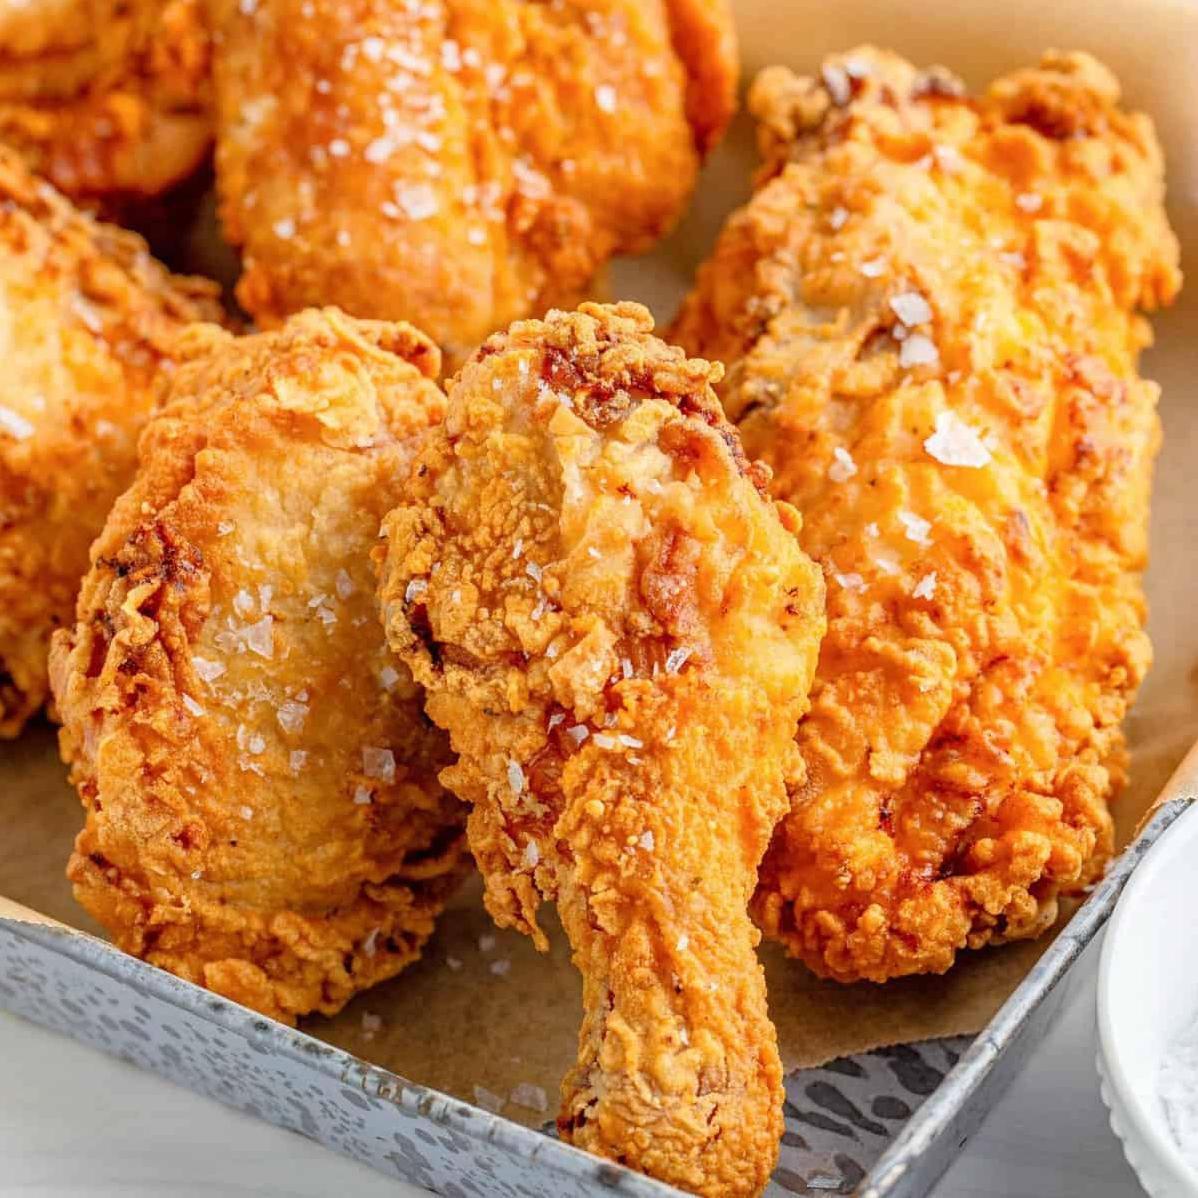  Trust me, this crispy and juicy chicken will have you coming back for seconds.